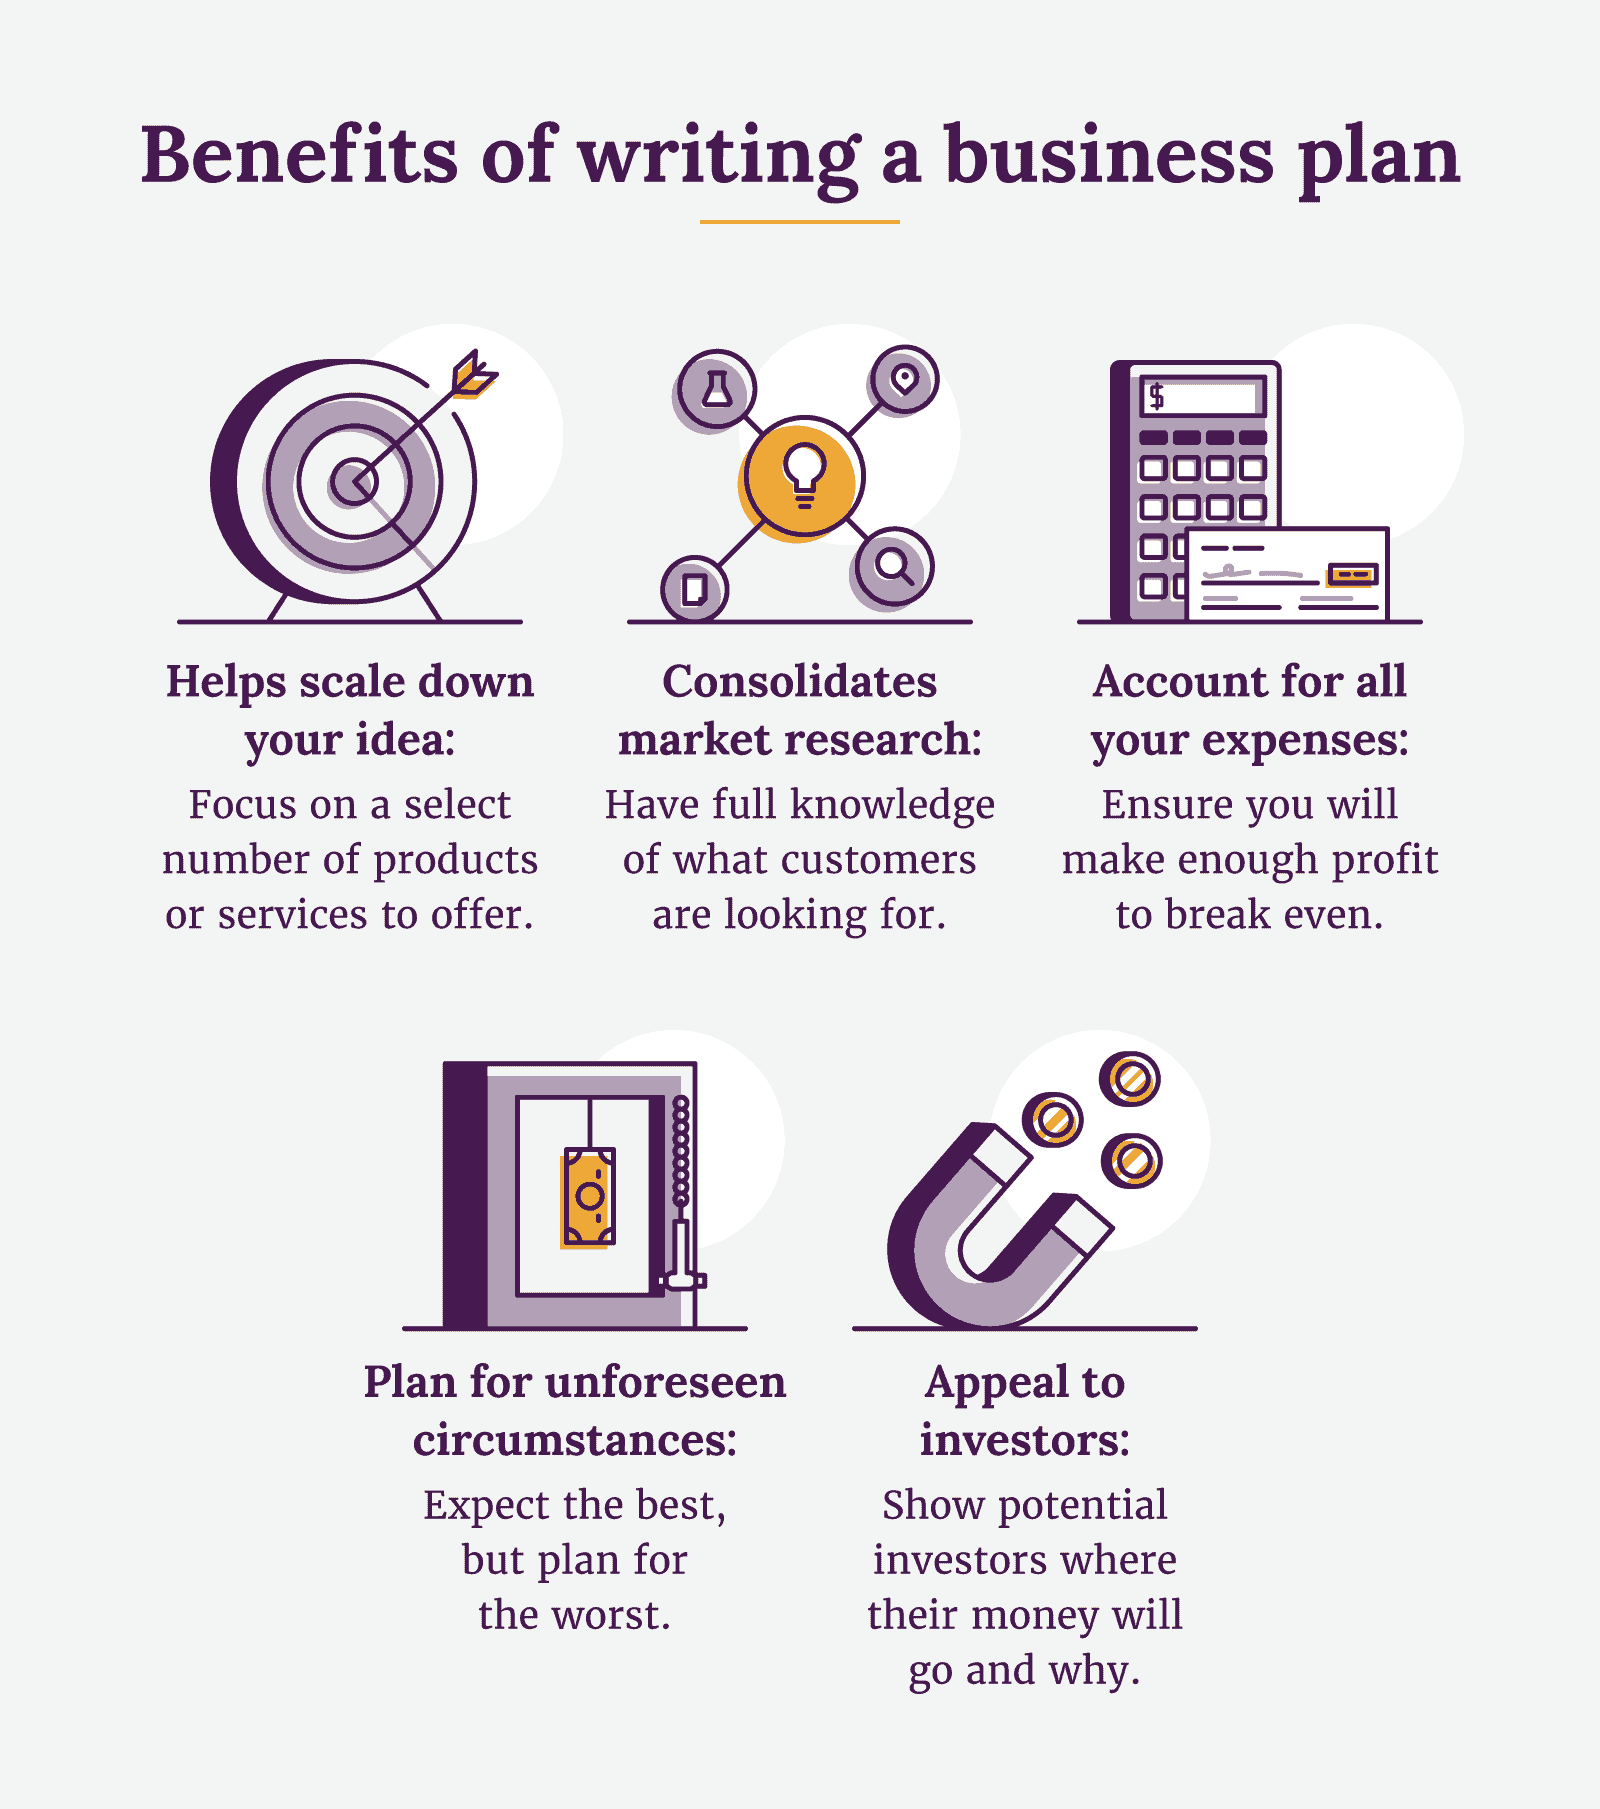 two benefits of business plan